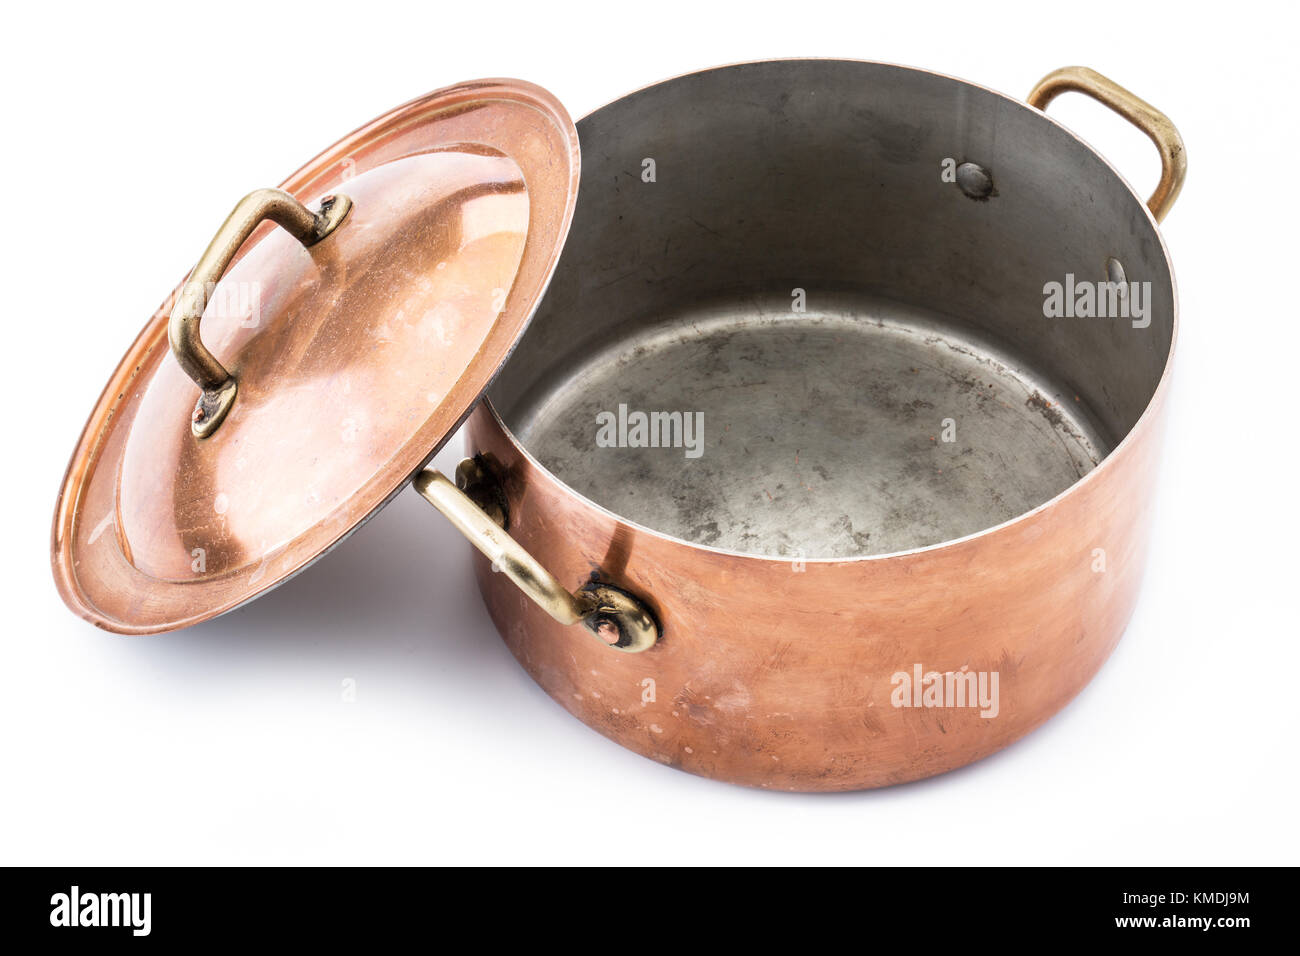 Opened copper pan and cover near it. Isolated on white background. Stock Photo